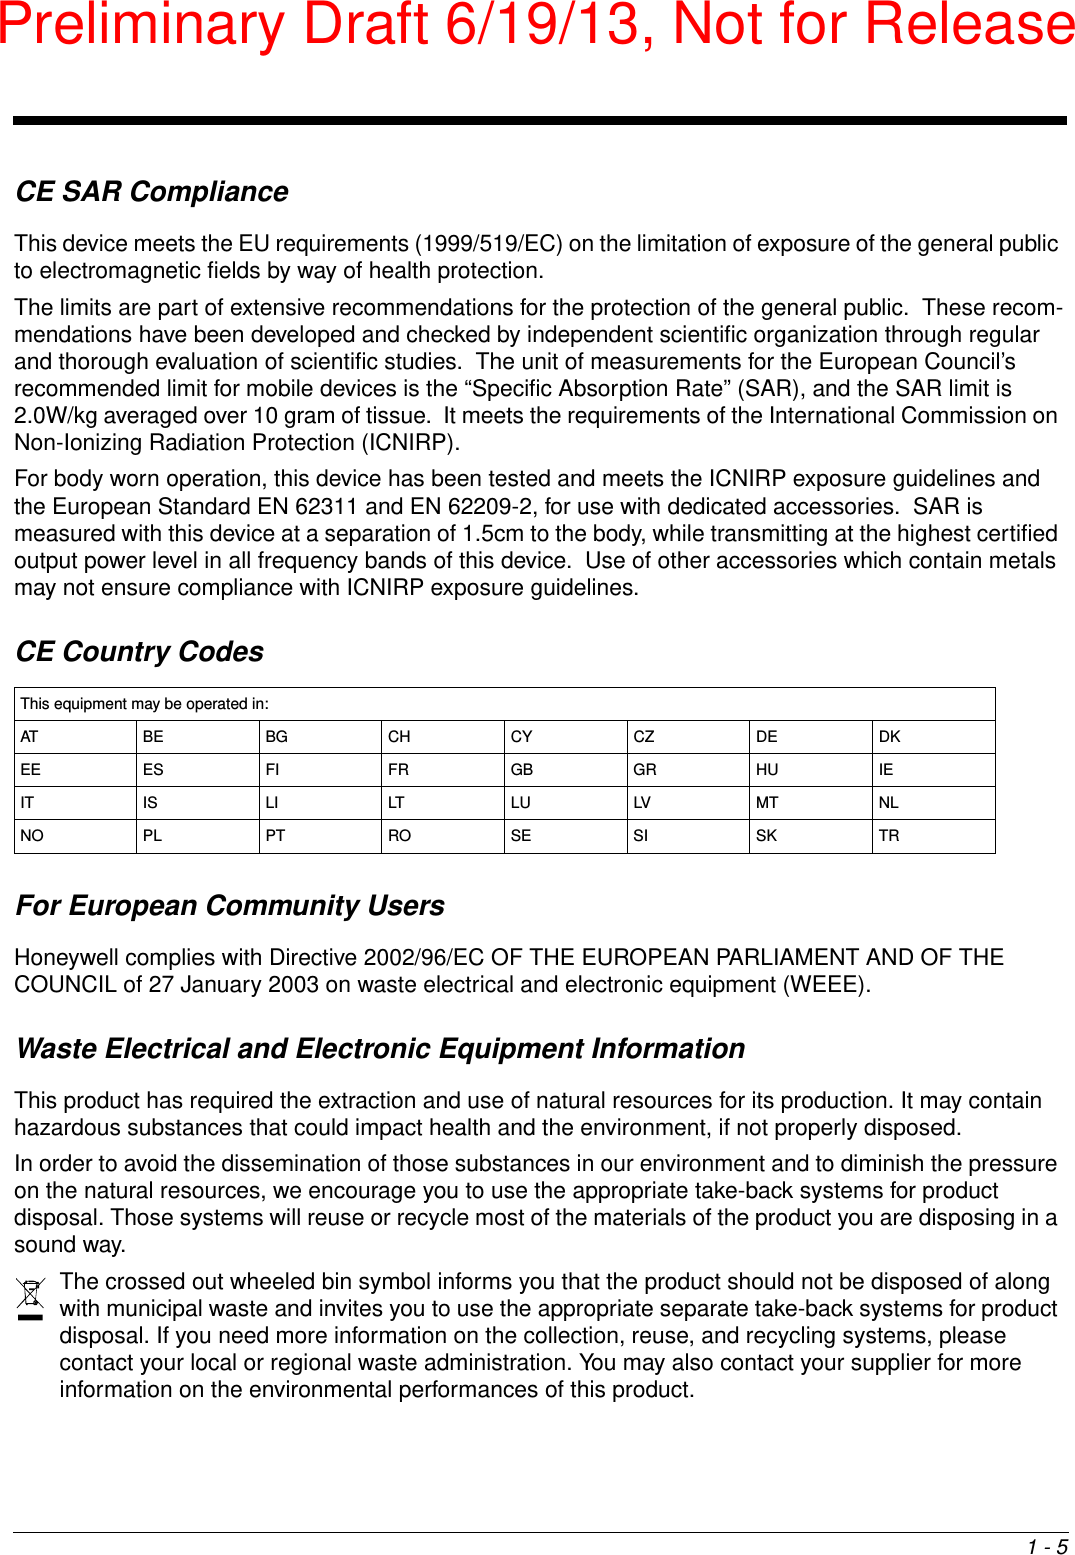 1 - 5CE SAR ComplianceThis device meets the EU requirements (1999/519/EC) on the limitation of exposure of the general public to electromagnetic fields by way of health protection.The limits are part of extensive recommendations for the protection of the general public.  These recom-mendations have been developed and checked by independent scientific organization through regular and thorough evaluation of scientific studies.  The unit of measurements for the European Council’s recommended limit for mobile devices is the “Specific Absorption Rate” (SAR), and the SAR limit is 2.0W/kg averaged over 10 gram of tissue.  It meets the requirements of the International Commission on Non-Ionizing Radiation Protection (ICNIRP).For body worn operation, this device has been tested and meets the ICNIRP exposure guidelines and the European Standard EN 62311 and EN 62209-2, for use with dedicated accessories.  SAR is measured with this device at a separation of 1.5cm to the body, while transmitting at the highest certified output power level in all frequency bands of this device.  Use of other accessories which contain metals may not ensure compliance with ICNIRP exposure guidelines. CE Country CodesFor European Community UsersHoneywell complies with Directive 2002/96/EC OF THE EUROPEAN PARLIAMENT AND OF THE COUNCIL of 27 January 2003 on waste electrical and electronic equipment (WEEE).Waste Electrical and Electronic Equipment InformationThis product has required the extraction and use of natural resources for its production. It may contain hazardous substances that could impact health and the environment, if not properly disposed.In order to avoid the dissemination of those substances in our environment and to diminish the pressure on the natural resources, we encourage you to use the appropriate take-back systems for product disposal. Those systems will reuse or recycle most of the materials of the product you are disposing in a sound way.The crossed out wheeled bin symbol informs you that the product should not be disposed of along with municipal waste and invites you to use the appropriate separate take-back systems for product disposal. If you need more information on the collection, reuse, and recycling systems, please contact your local or regional waste administration. You may also contact your supplier for more information on the environmental performances of this product.This equipment may be operated in:AT BE BG CH CY CZ DE DKEE ES FI FR GB GR HU IEIT IS LI LT LU LV MT NLNO PL PT RO SE SI SK TRPreliminary Draft 6/19/13, Not for Release